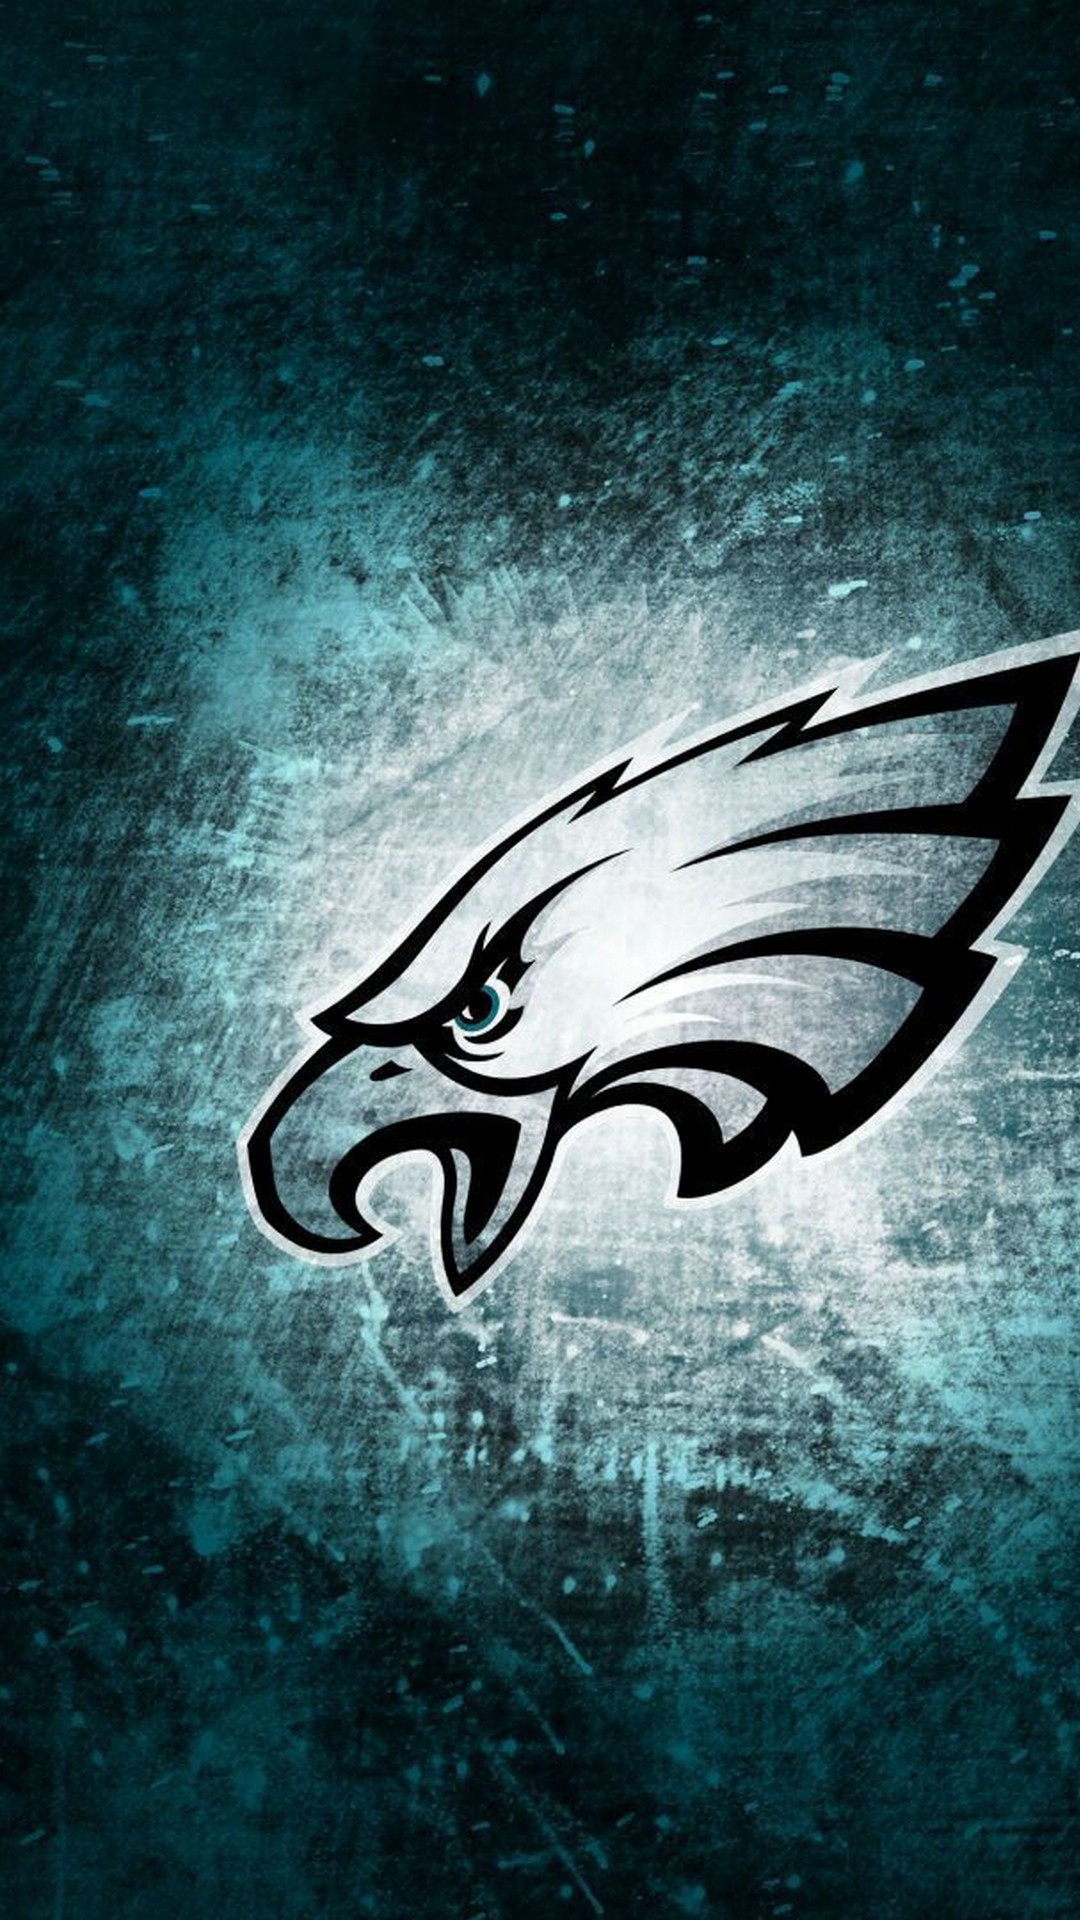 Eagles Football iPhone 6 Wallpaper With Resolution 1080X1920 pixel. You can make this wallpaper for your Mac or Windows Desktop Background, iPhone, Android or Tablet and another Smartphone device for free